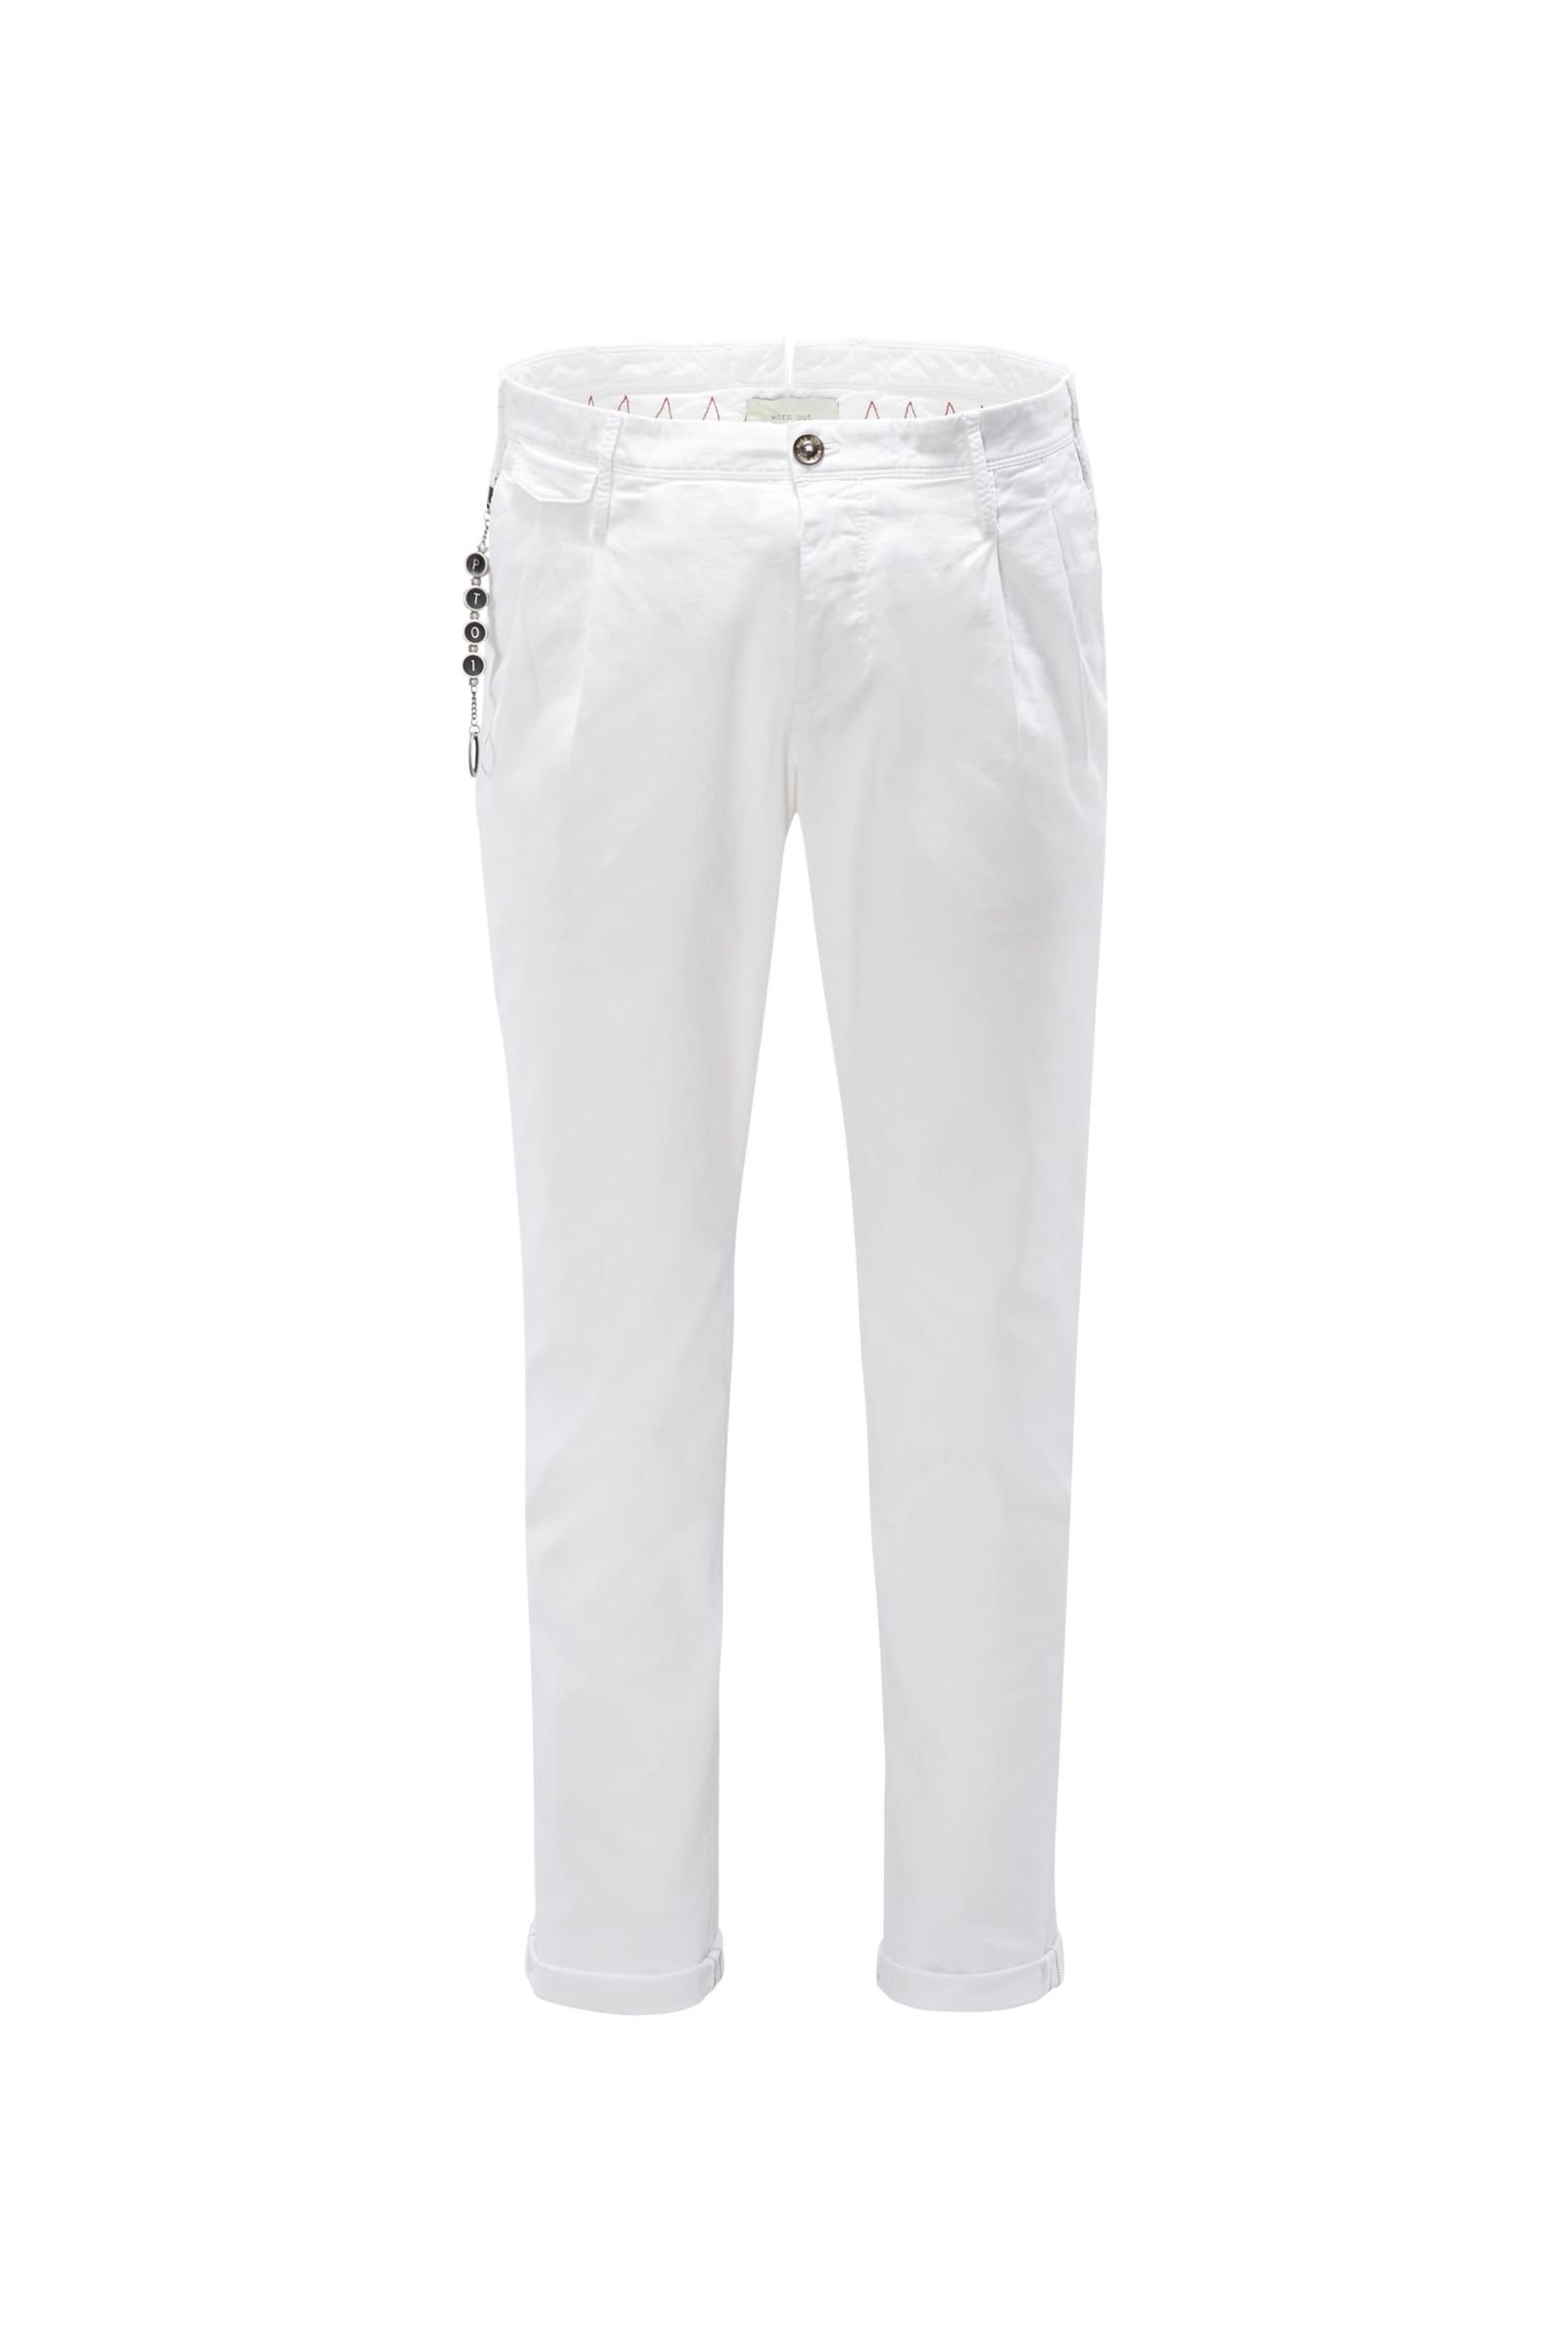 Cotton trousers 'Arial Worn out Elegance' white